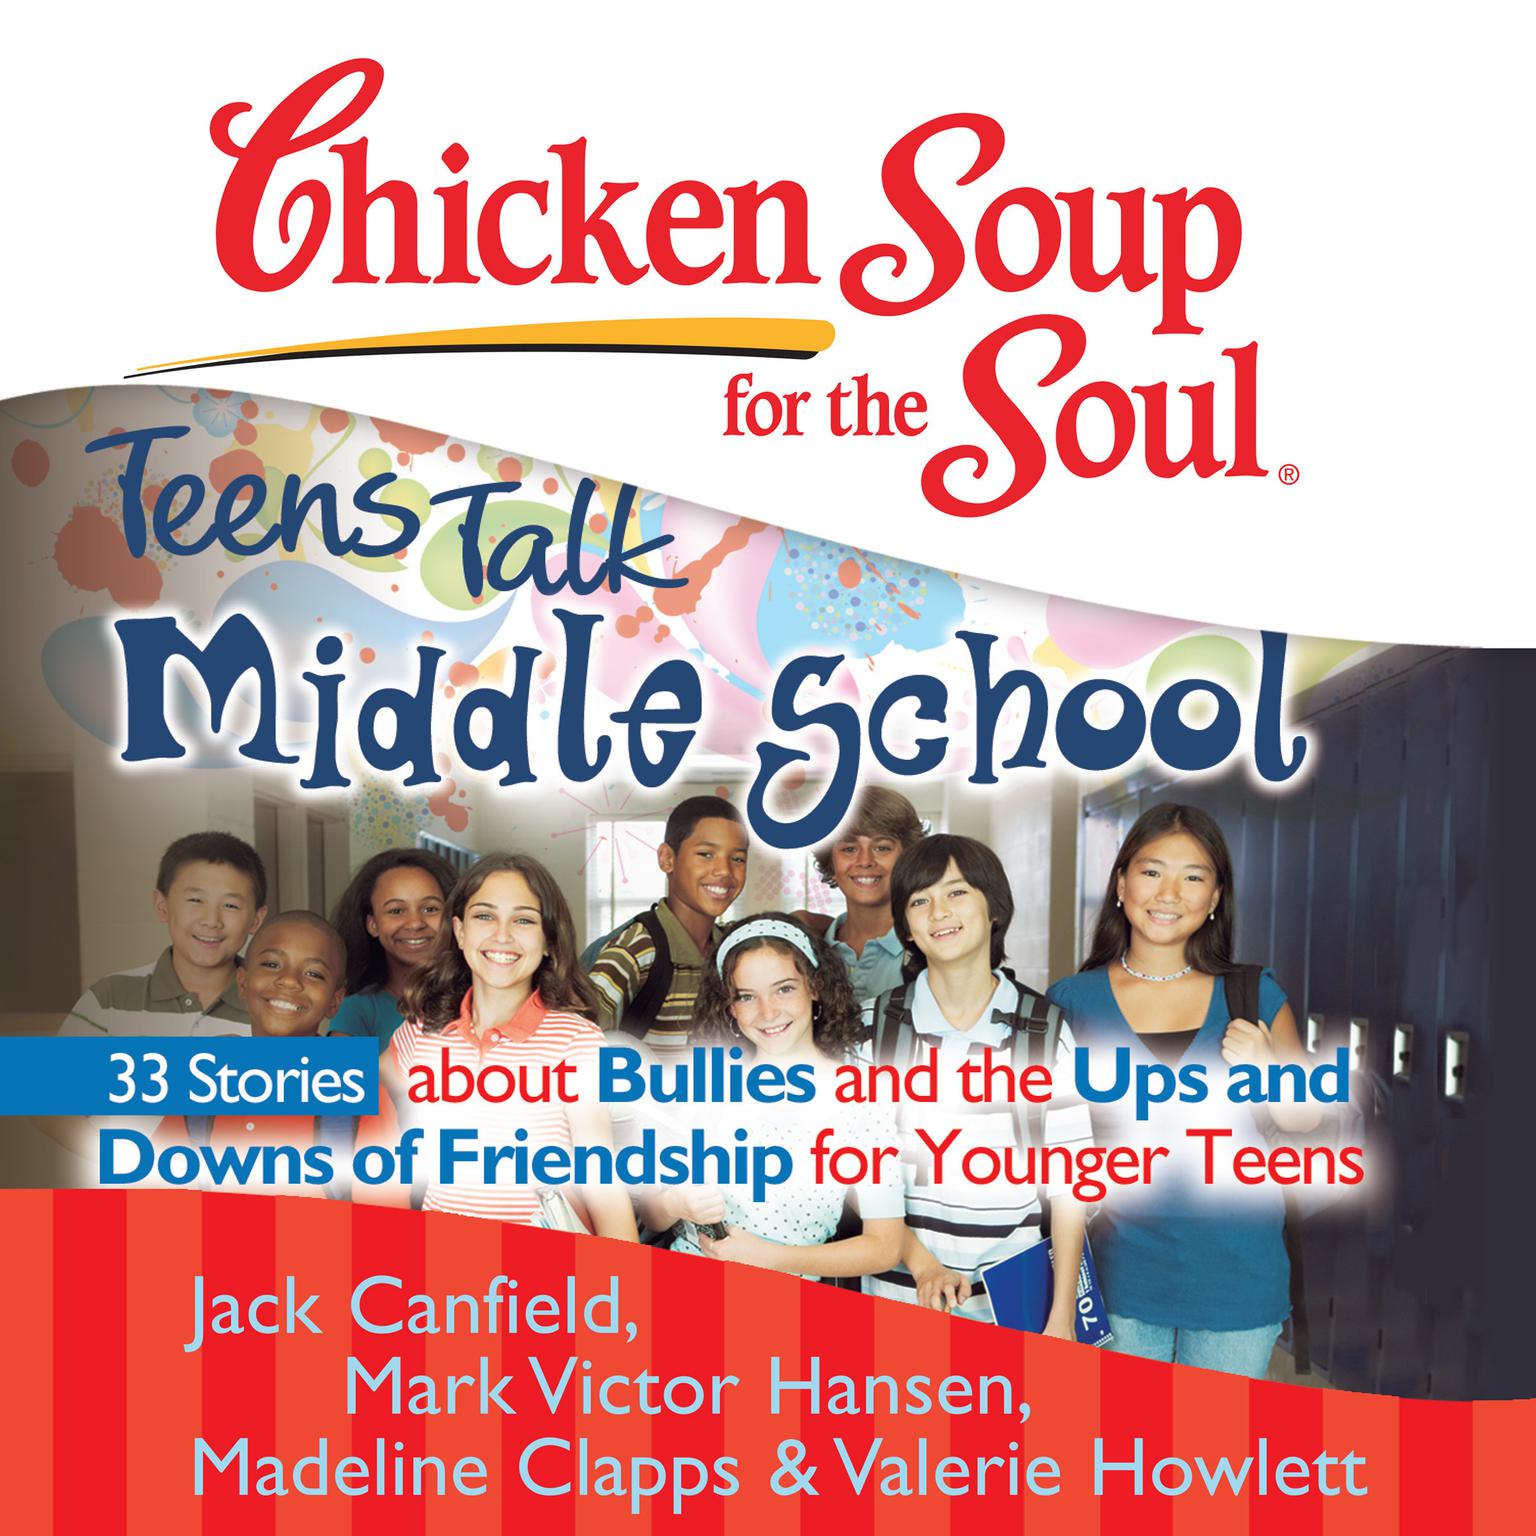 Chicken Soup for the Soul: Teens Talk Middle School - 33 Stories about Bullies and the Ups and Downs of Friendship for Younger Teens Audiobook, by Jack Canfield